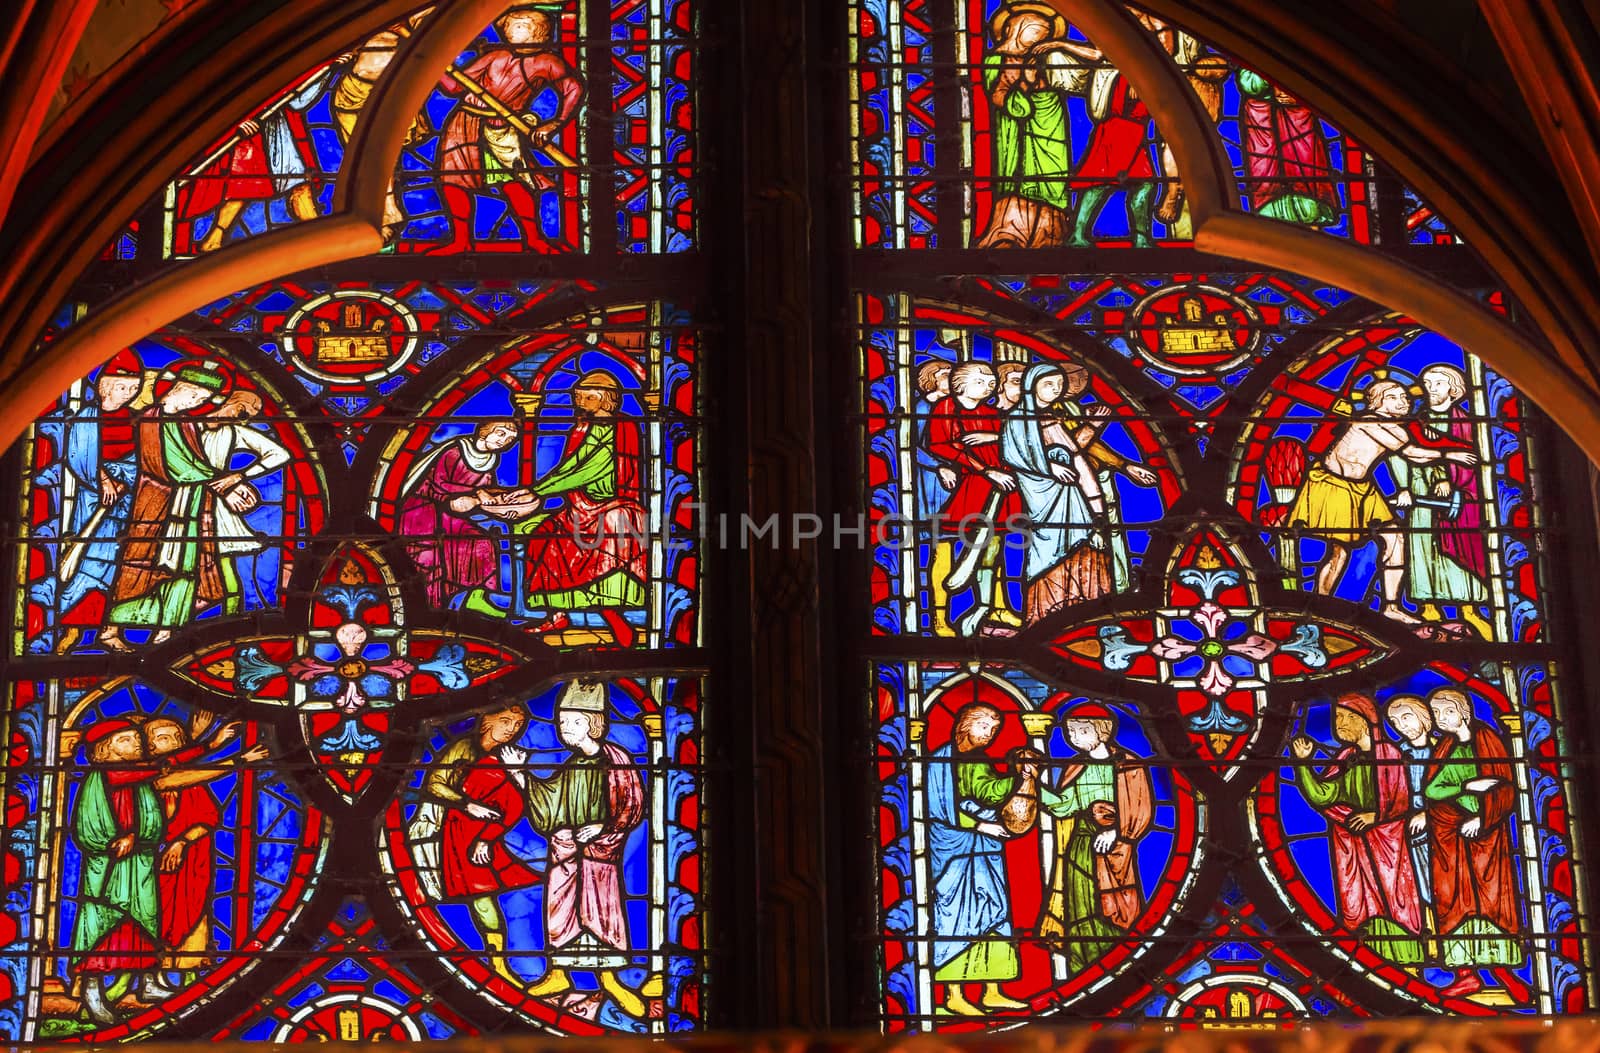 Jesus Crucifixion Story Stained Glass Saint Chapelle Paris France.  Saint King Louis 9th created Sainte Chappel in 1248 to house Christian relics, including Christ's Crown of Thorns.  Stained Glass created in the 13th Century and shows various biblical stories along wtih stories from 1200s.